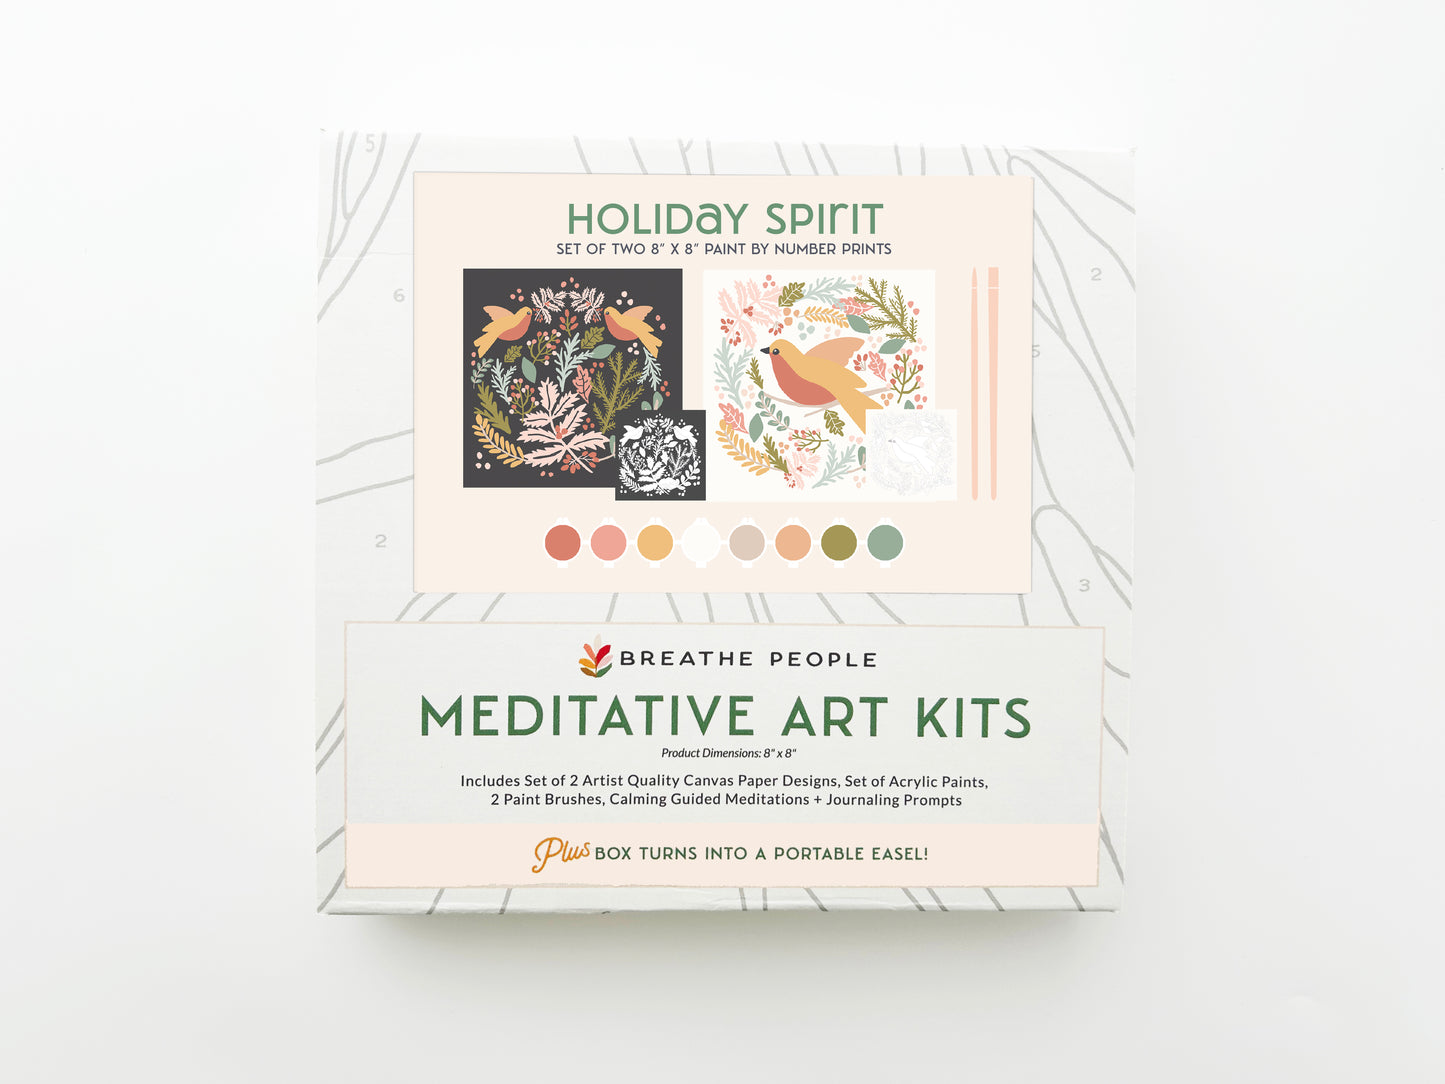 A Holiday Spirit Set Meditative Art Paint by Numbers Set of 2 8x8" Prints